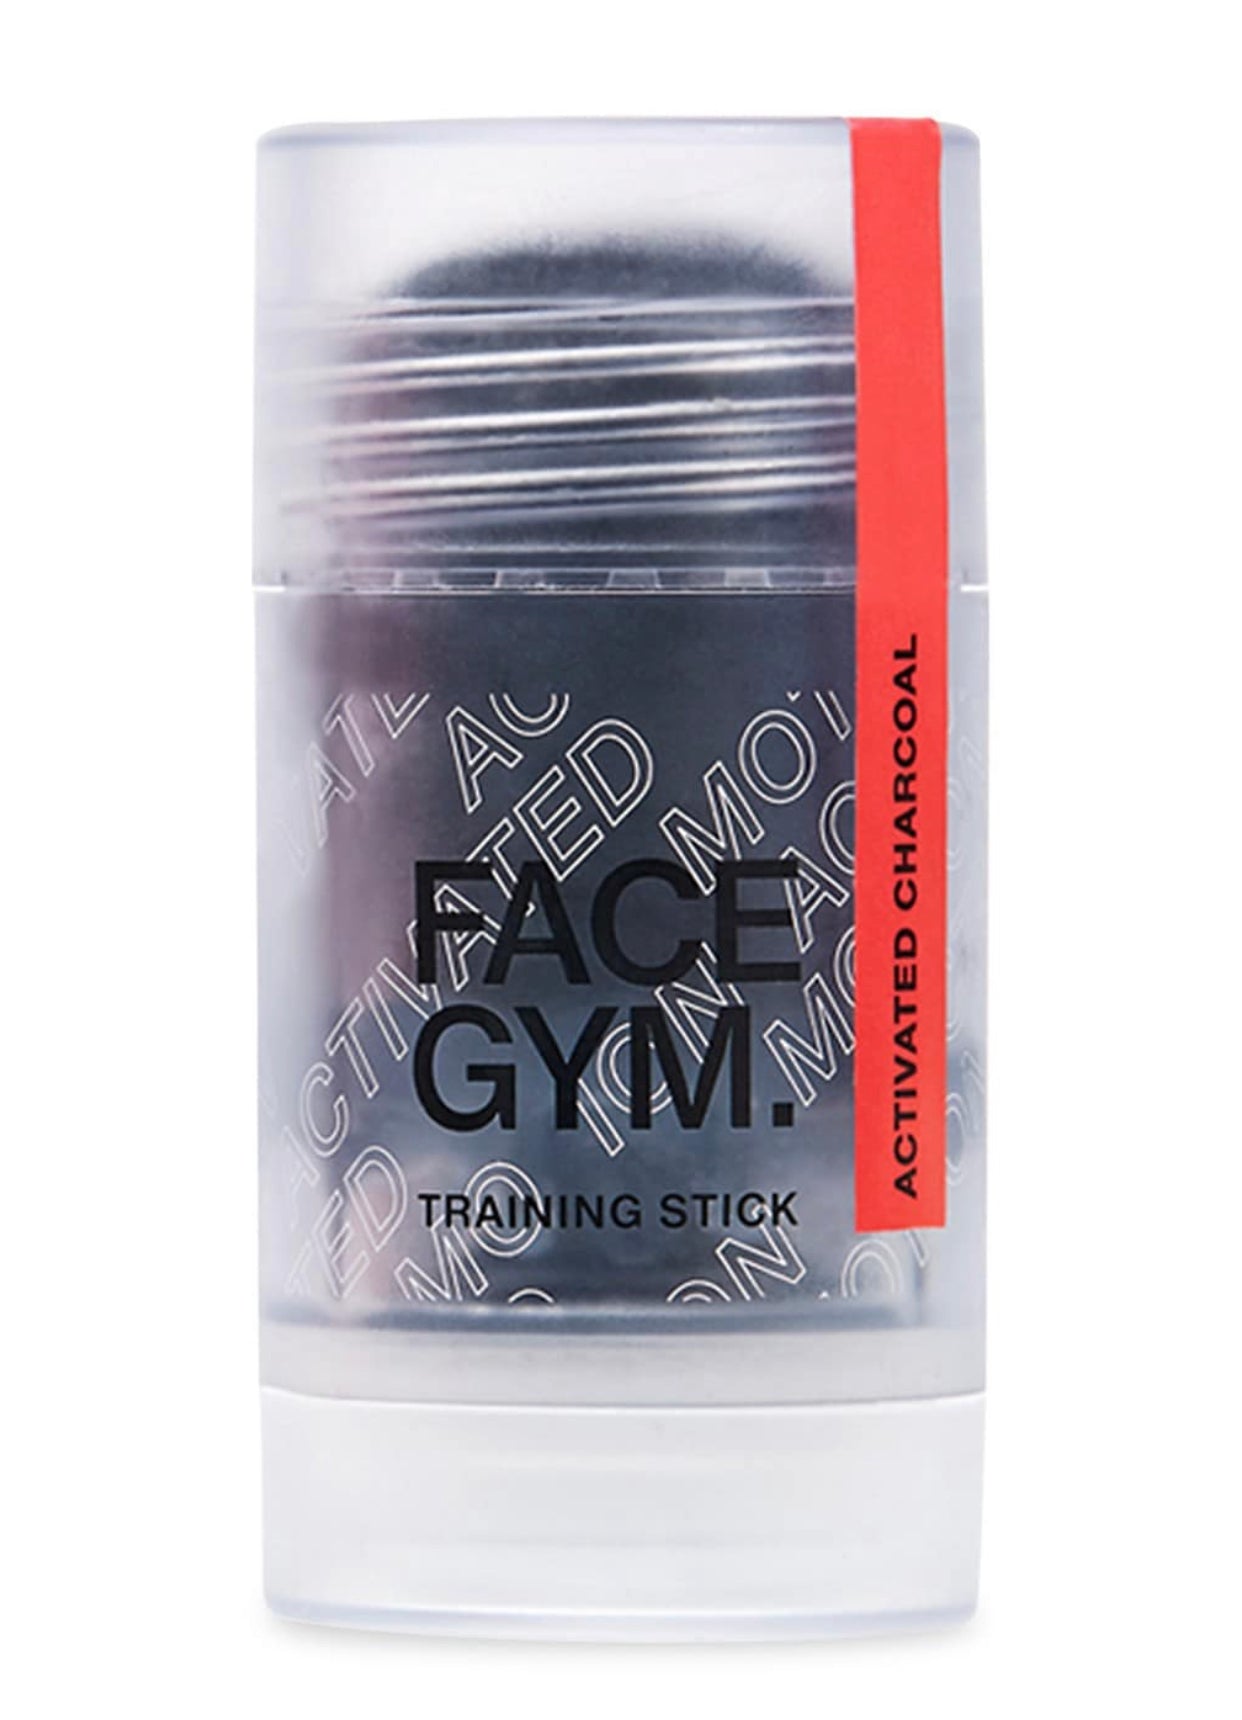 FACE GYM, MOTION ACTIVATED SKINCARE DETOX ACTIVATED CHARCOAL TRAINING STICK